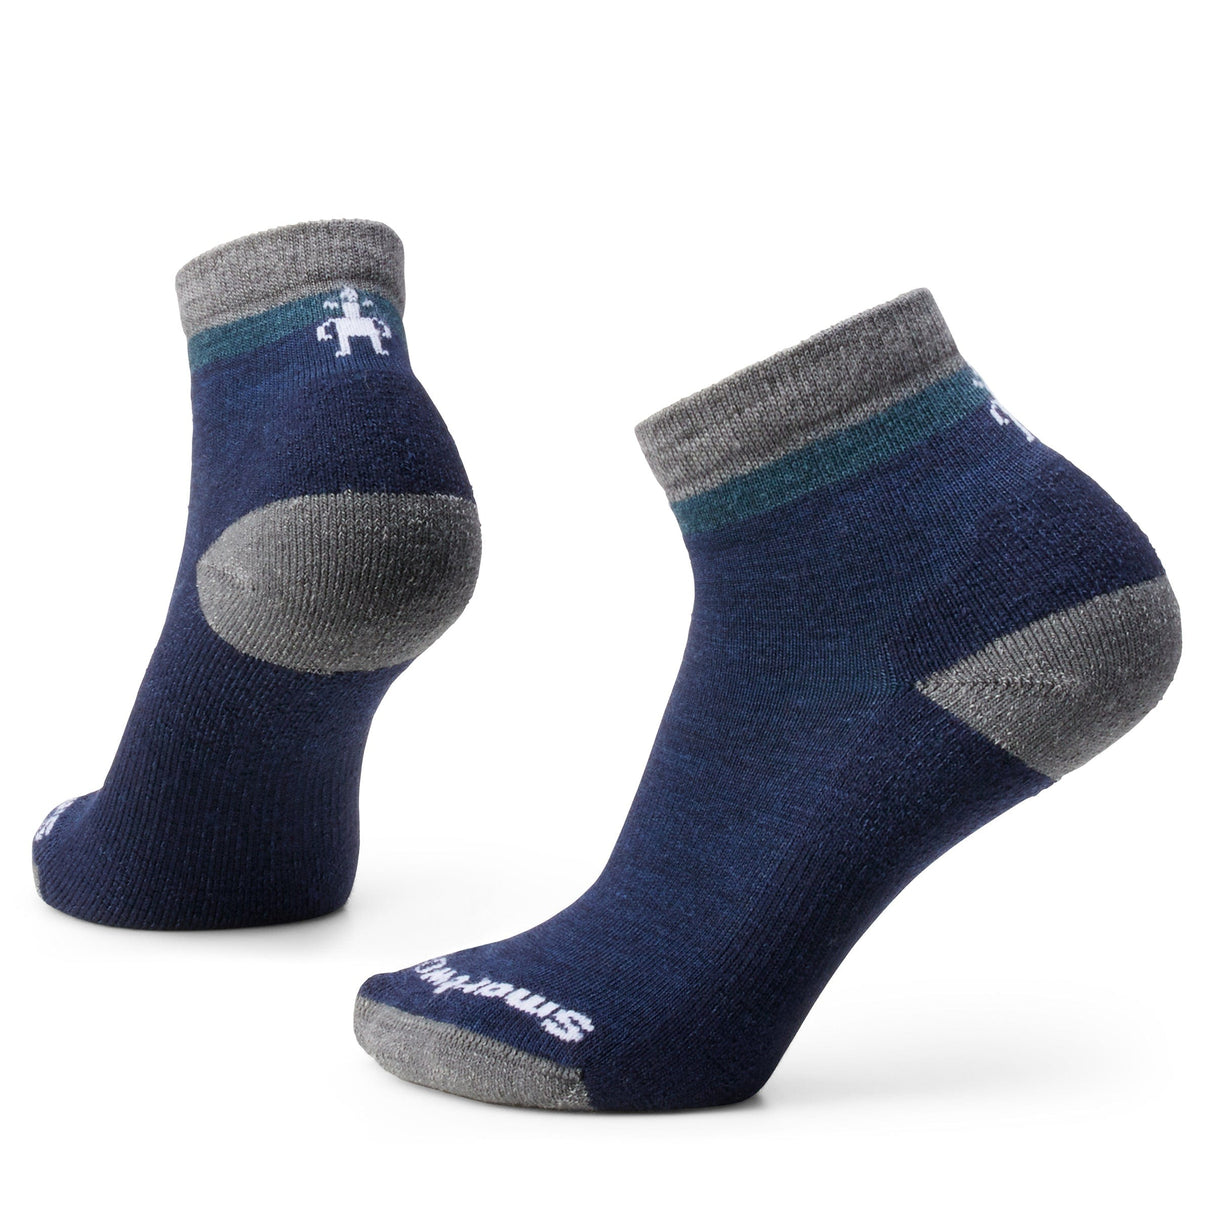 Smartwool Everyday Top Stripe Light Cushion Ankle Socks  -  Small / Deep Navy